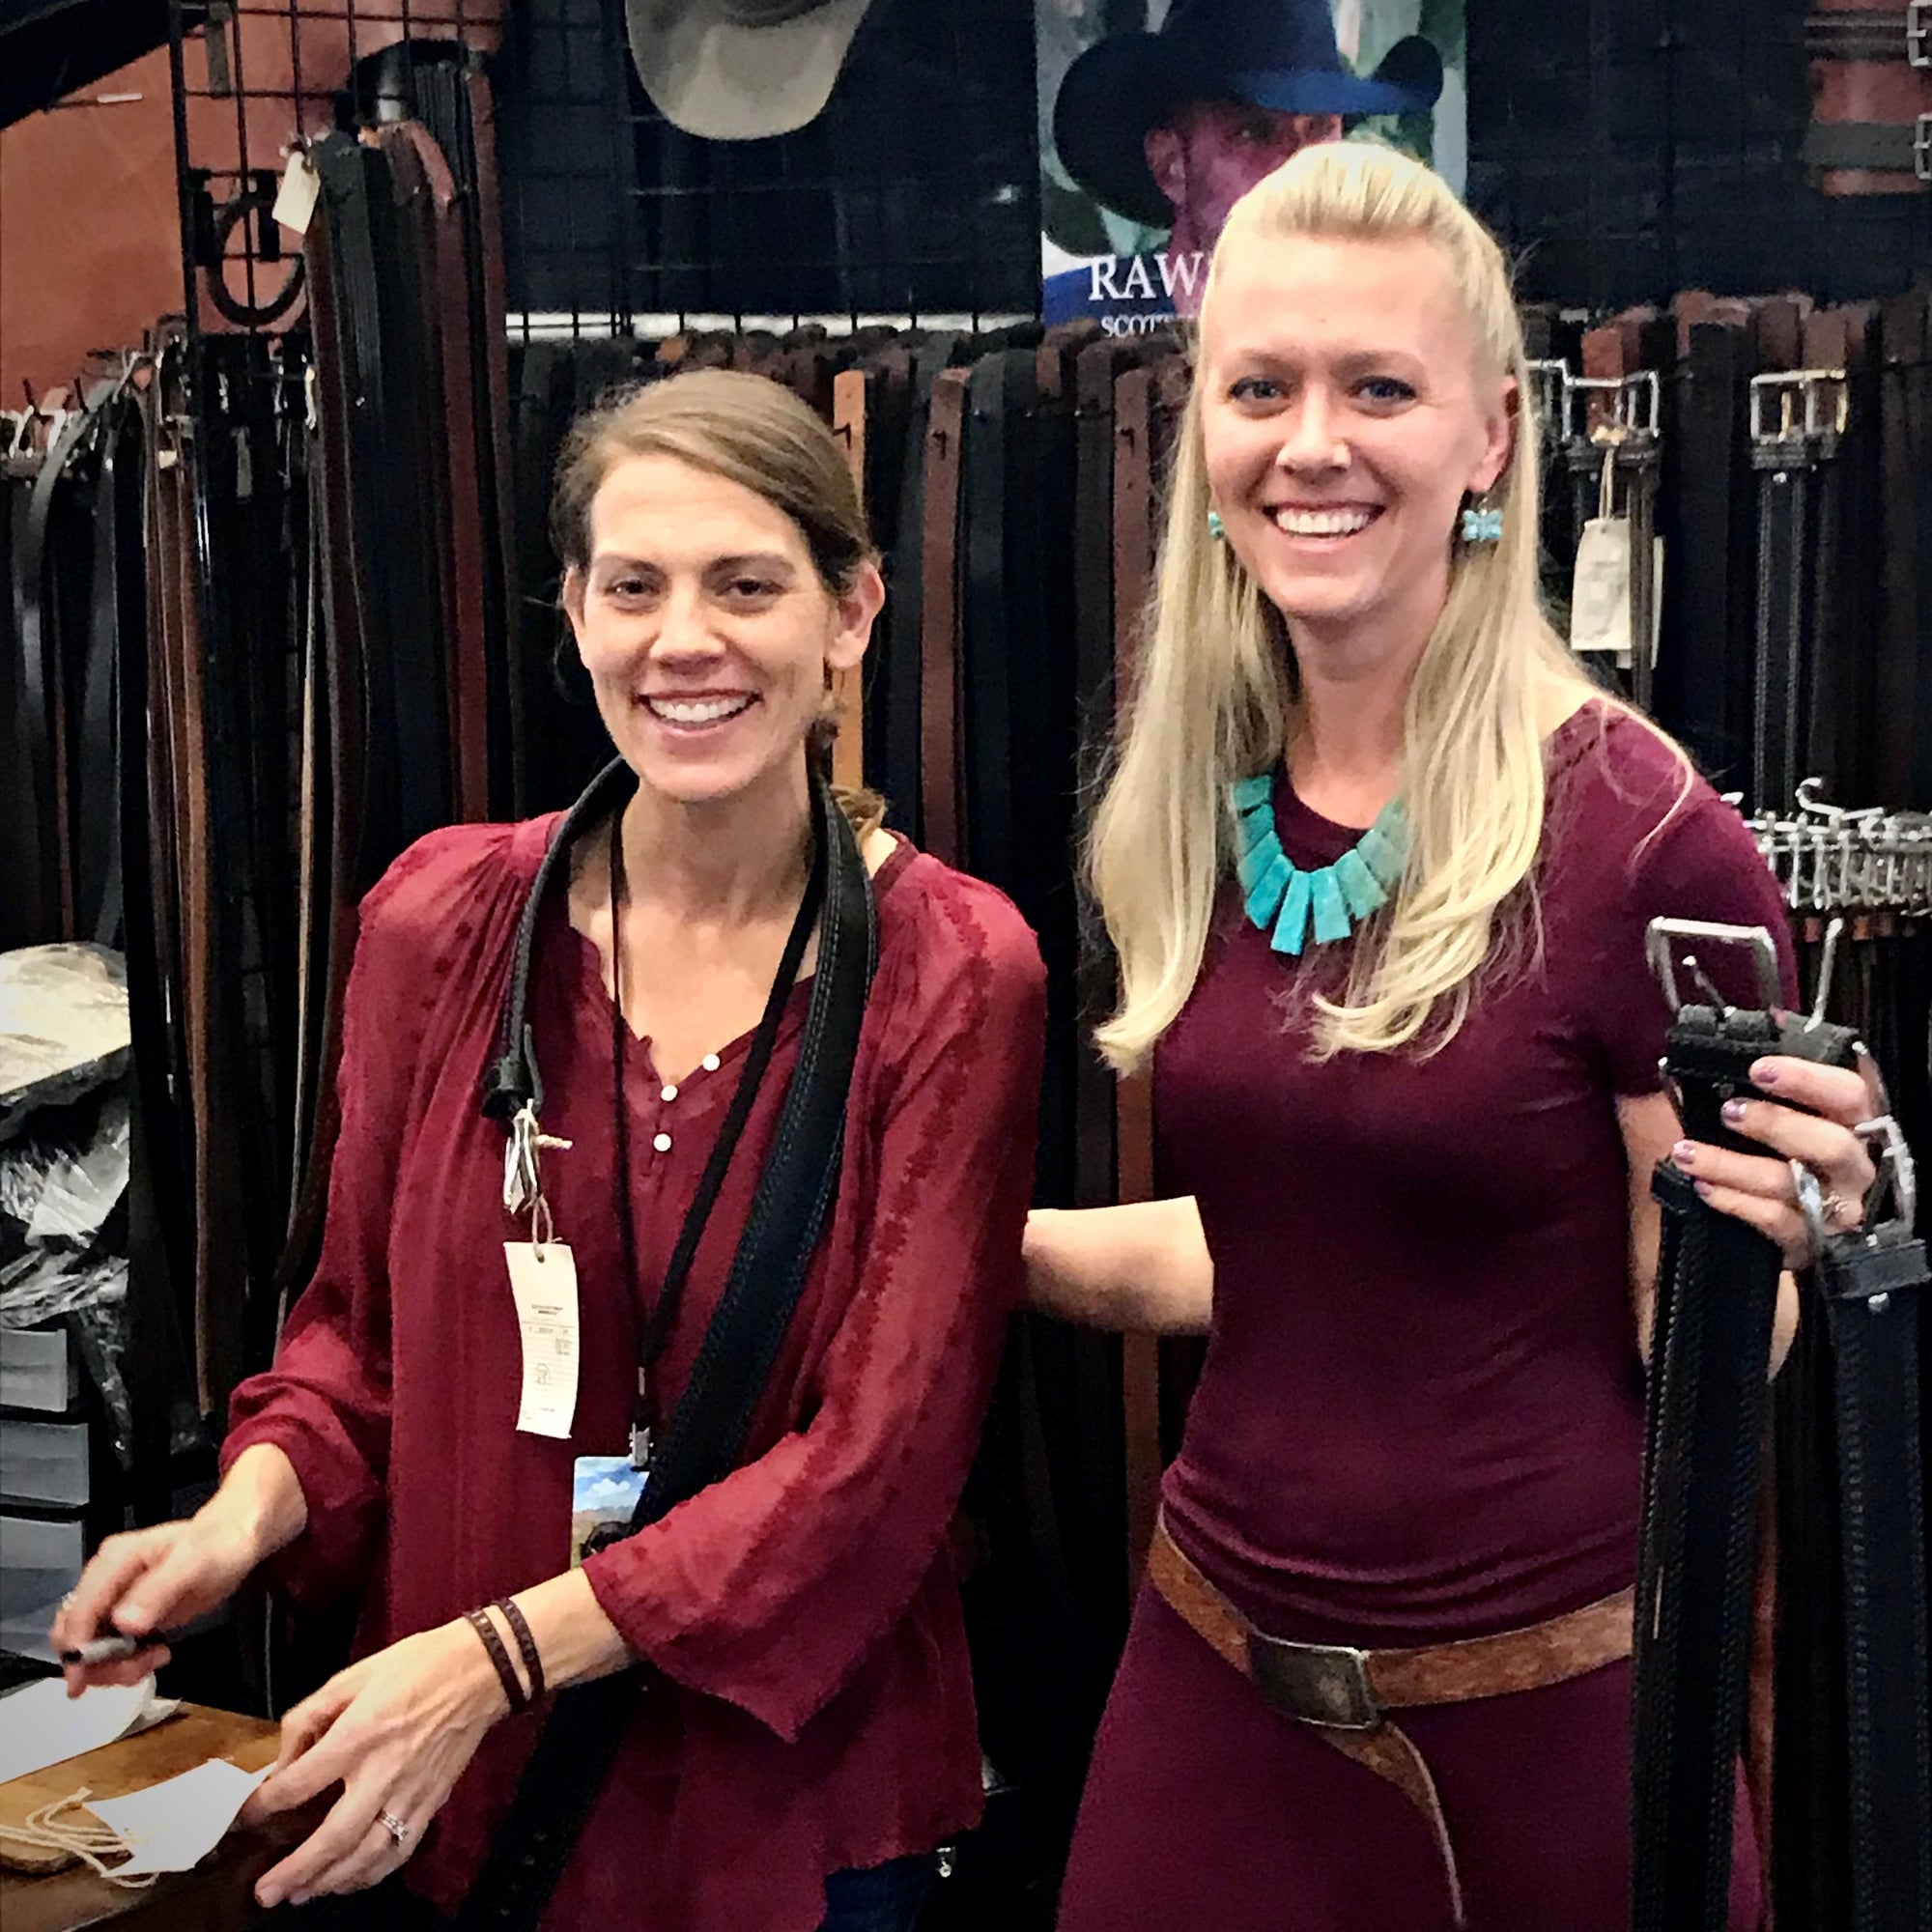 The smiling staff  from Scottsdale Belt Company